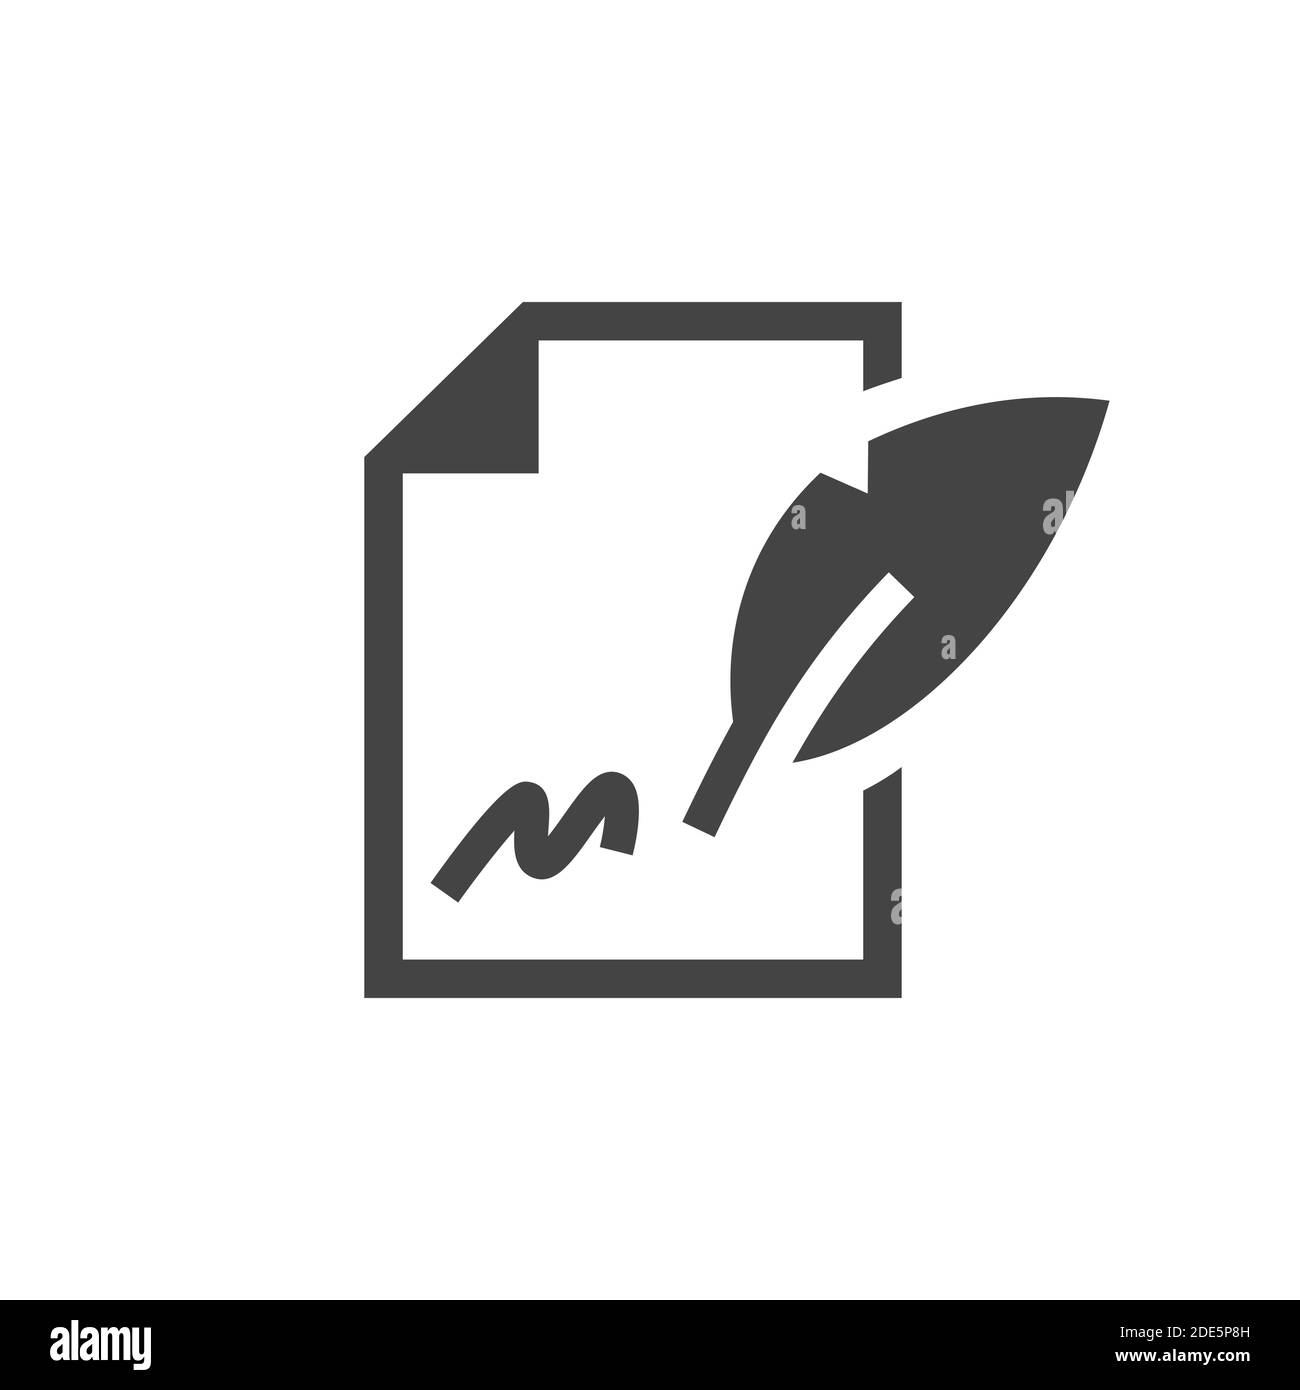 Contract signing black vector icon. Paper document with signature and quill pen sign. Stock Vector